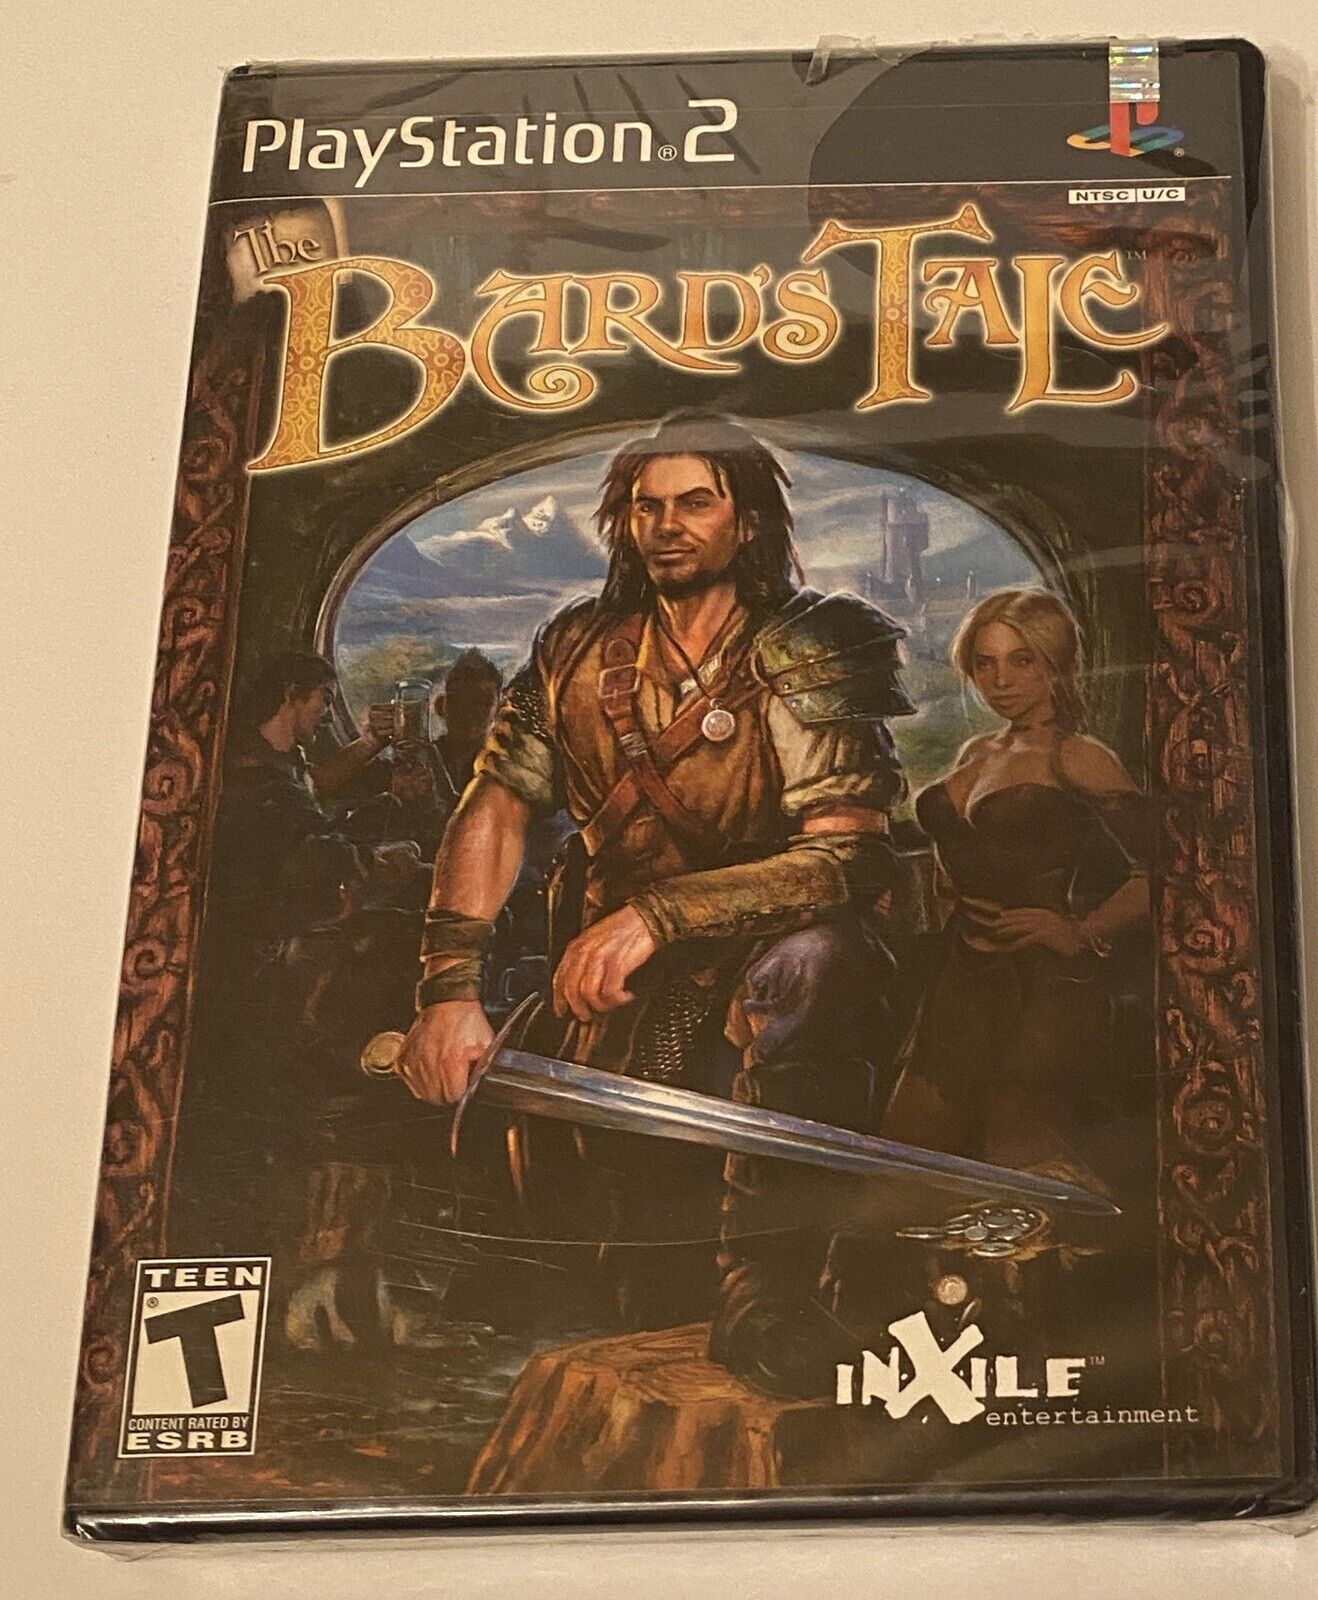 Sony Playstation 2 Game -The Bards Tale By Inxile - Brand New In Shrink Wrap